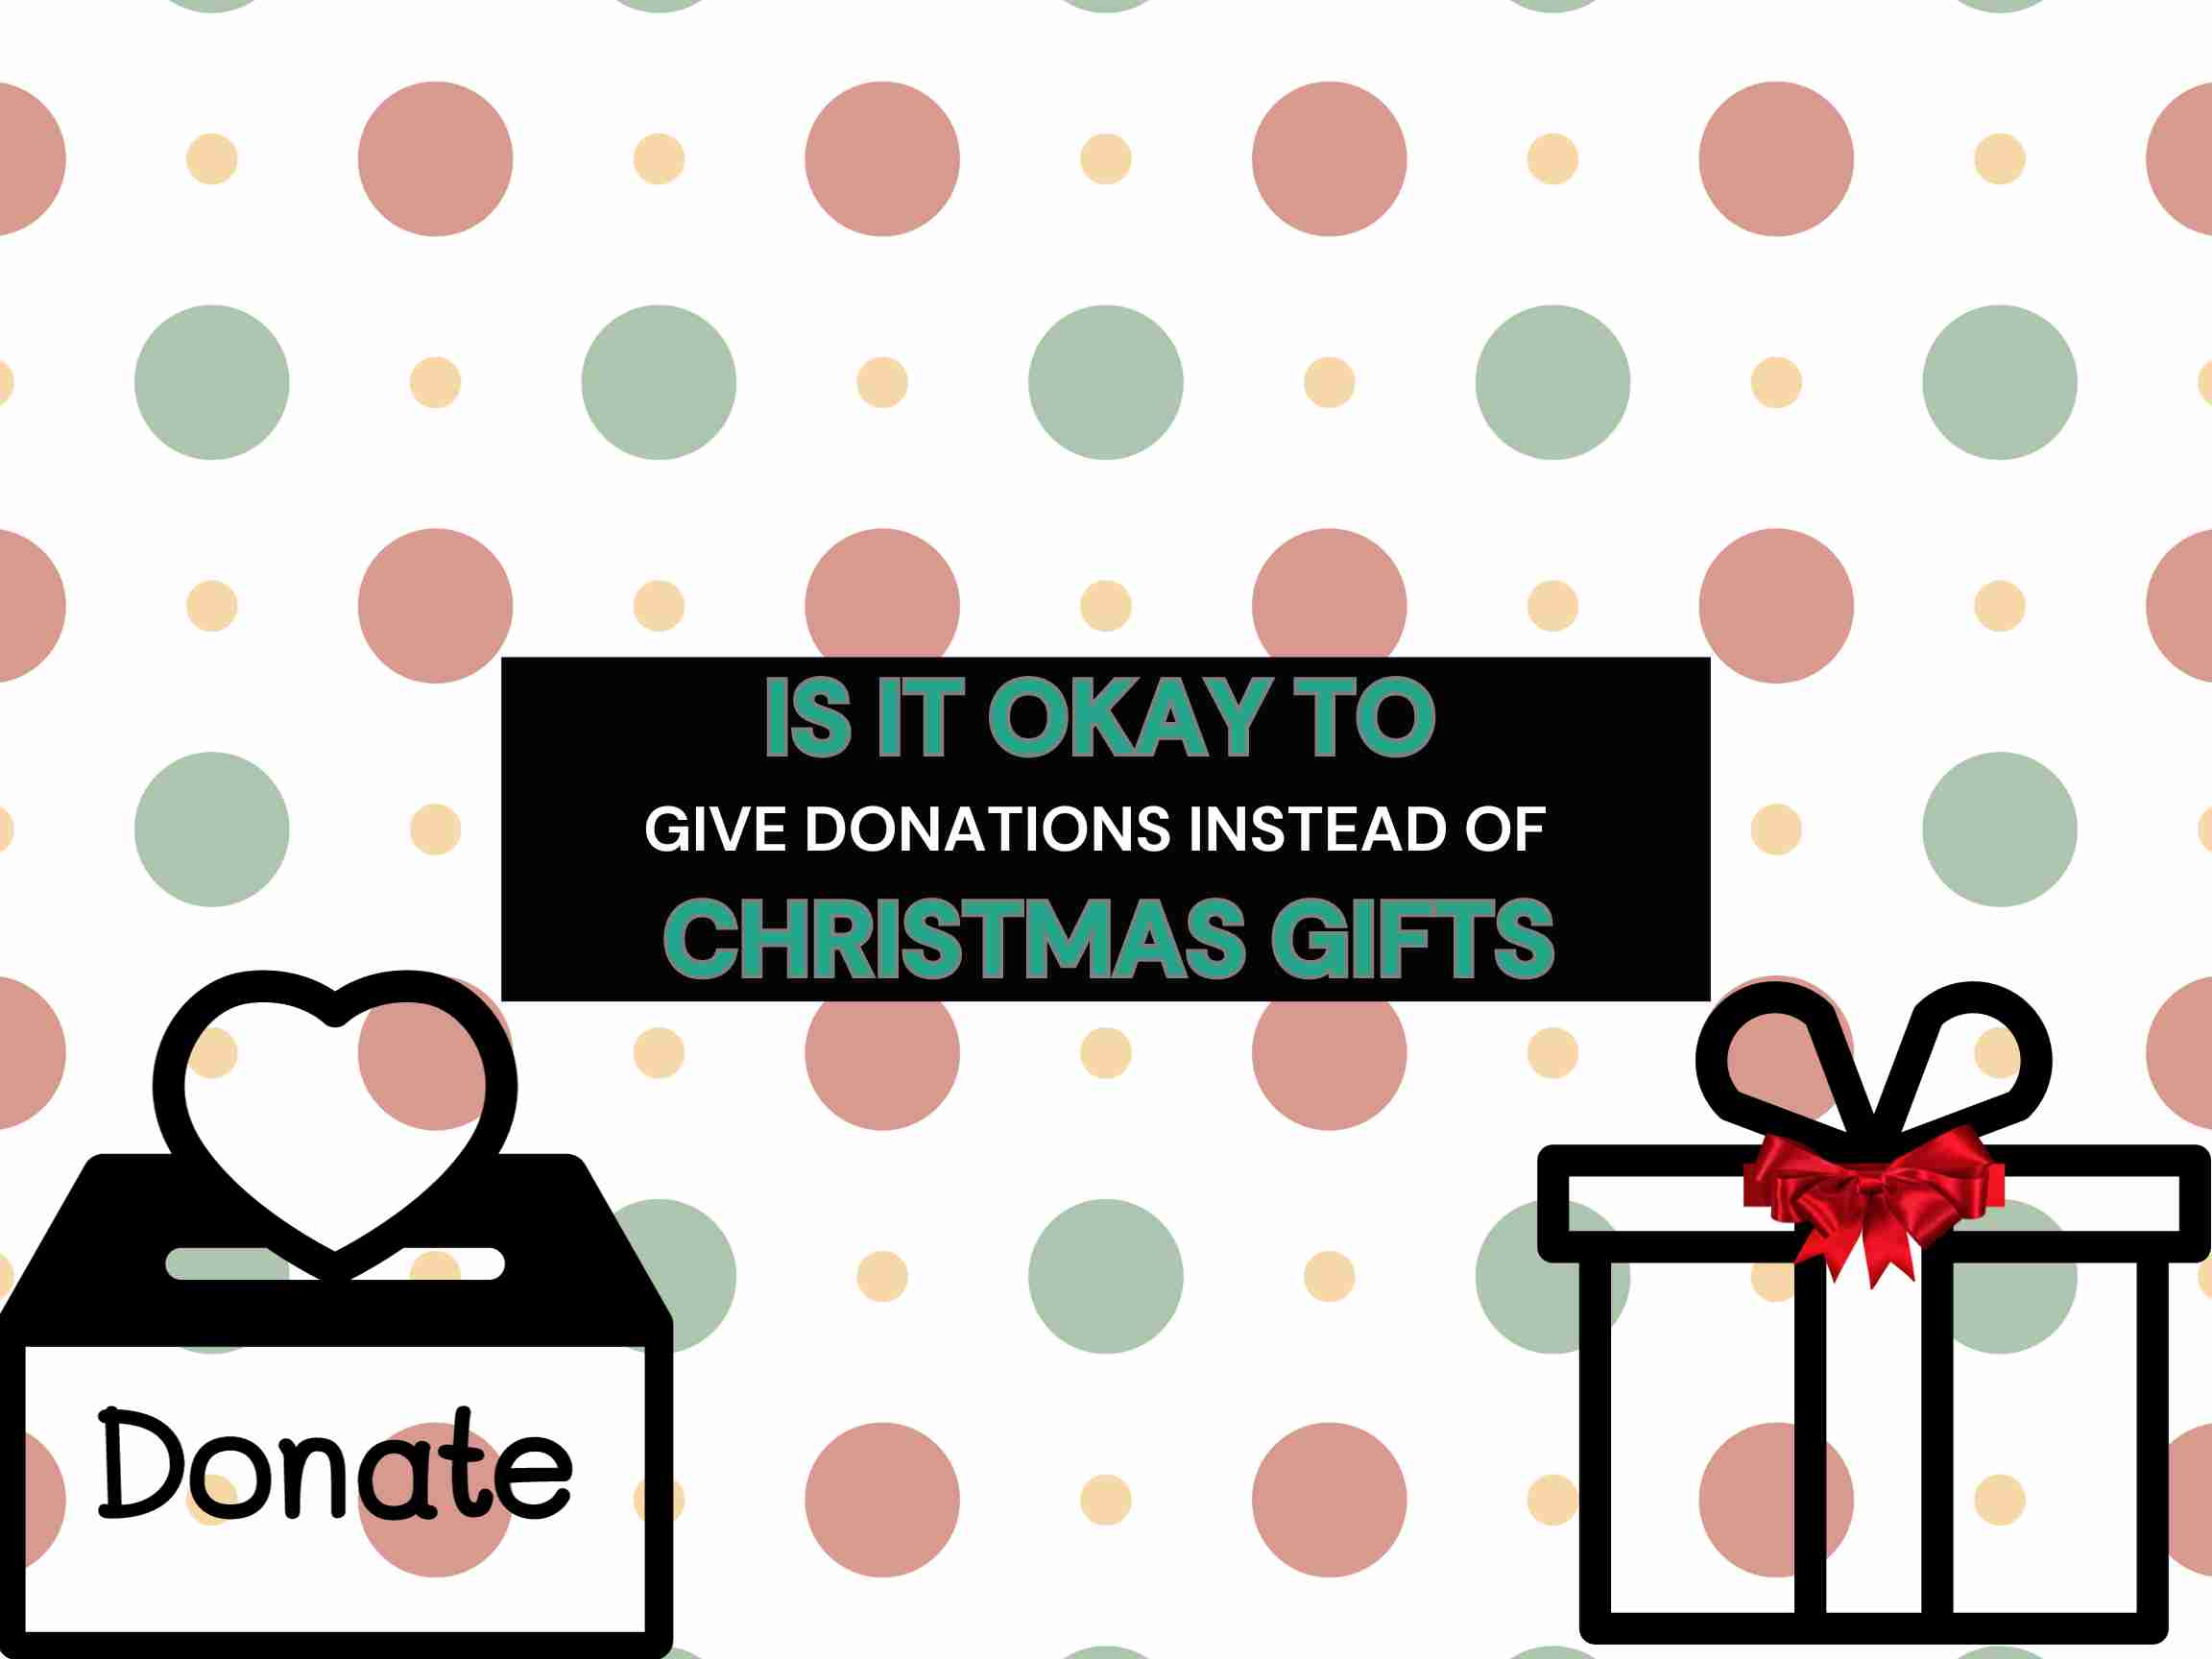 Is it okay to give donations instead of christmas gifts